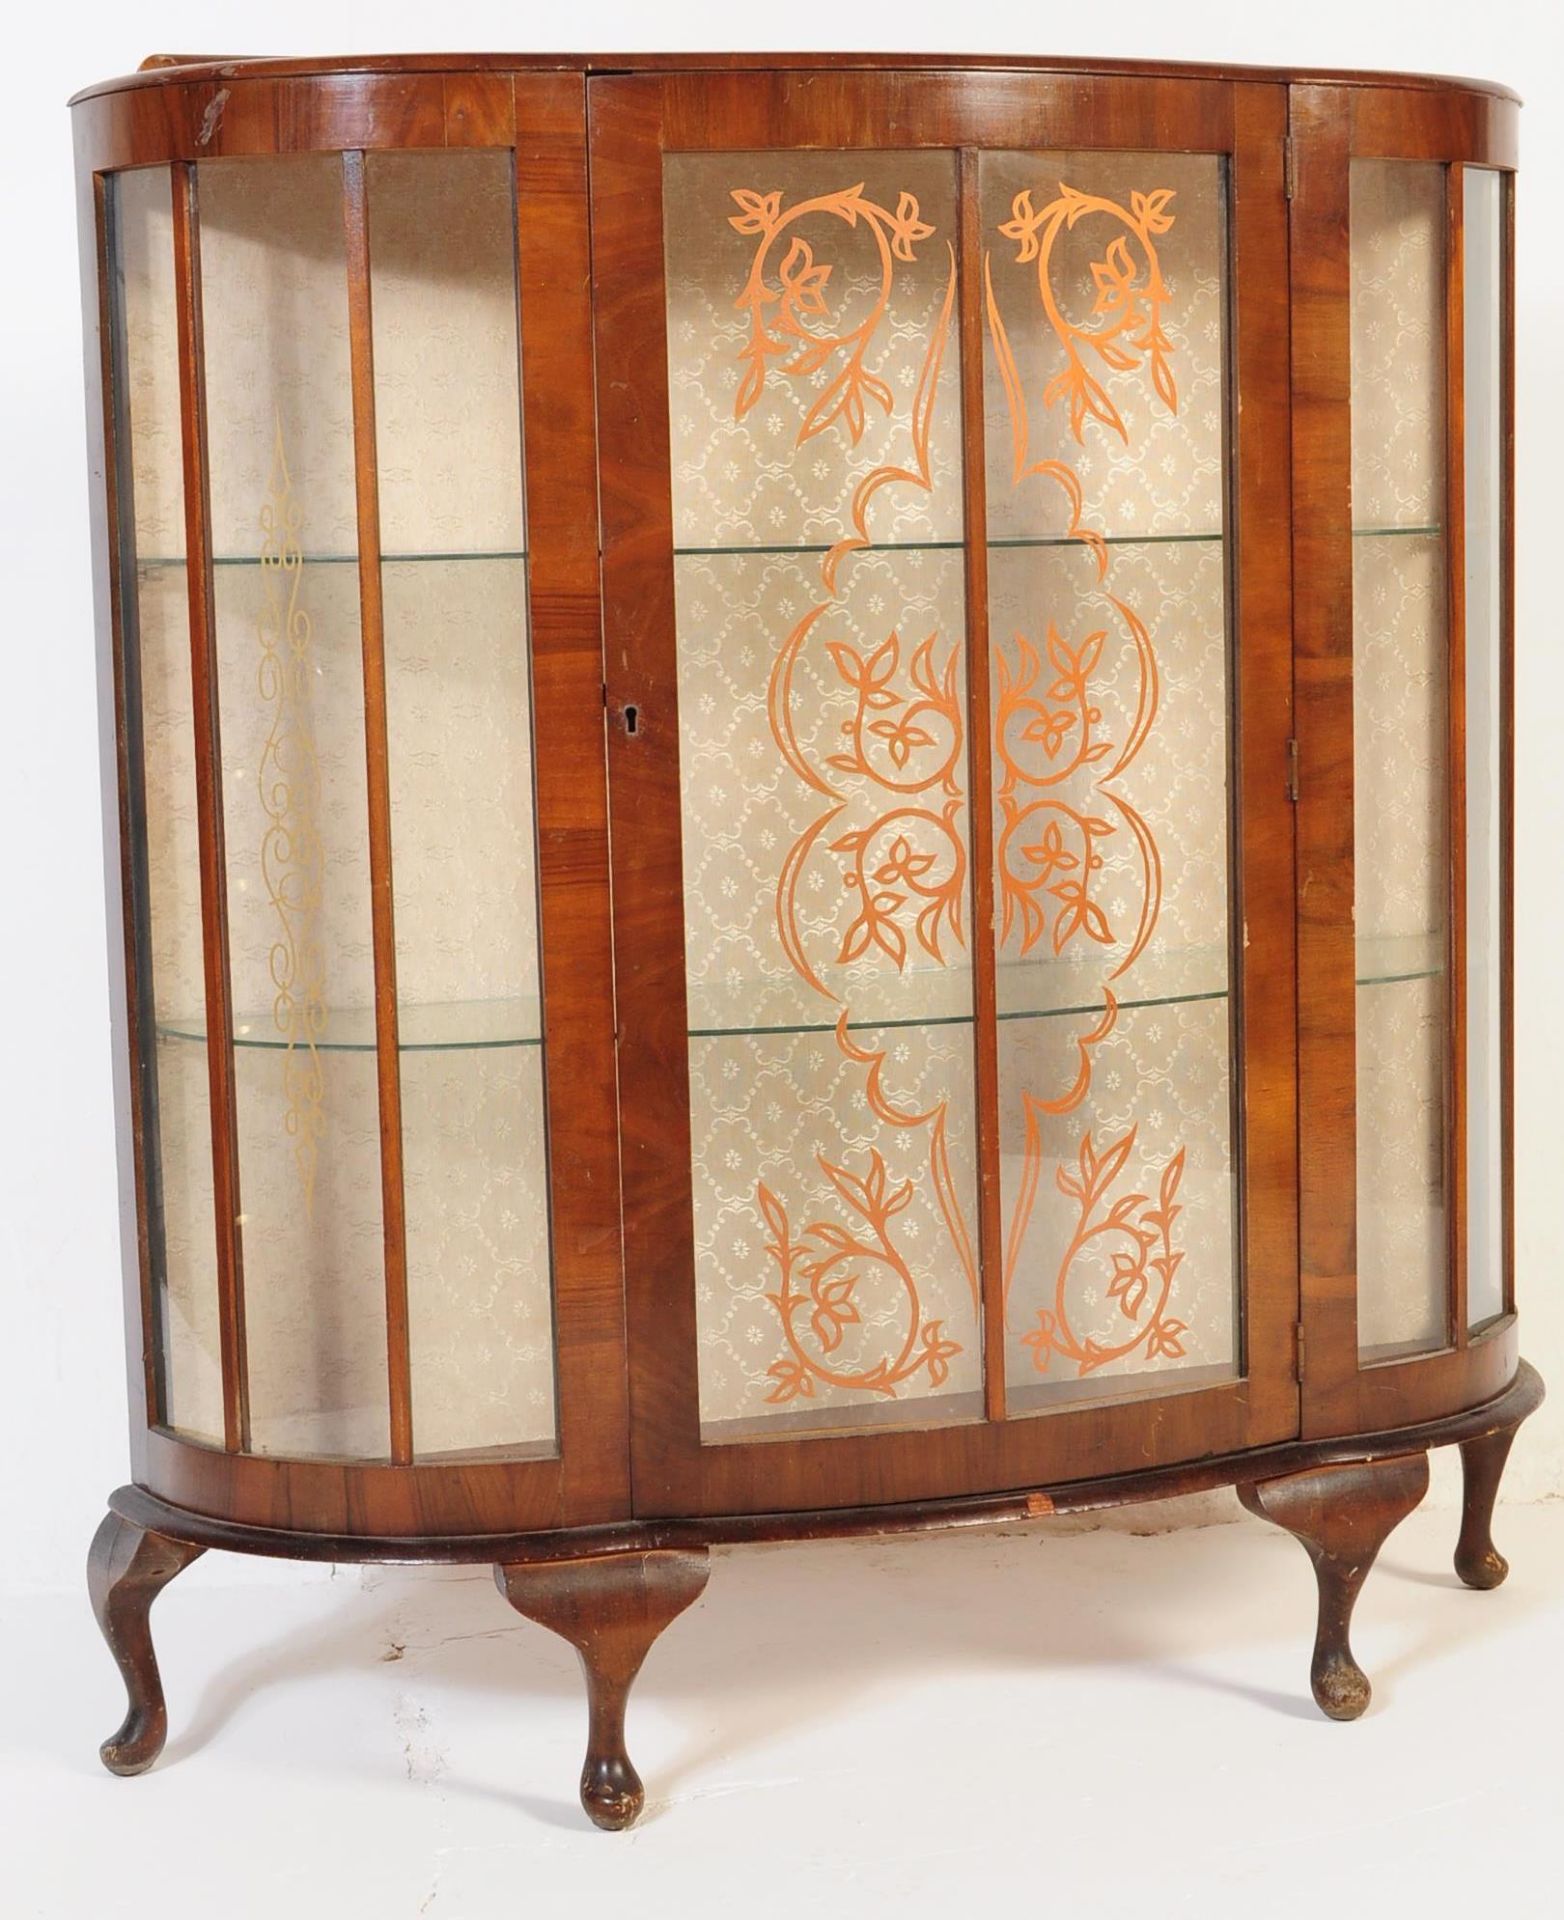 1950S QUEEN ANNE REVIVAL WALNUT CHINA DISPLAY CABINET